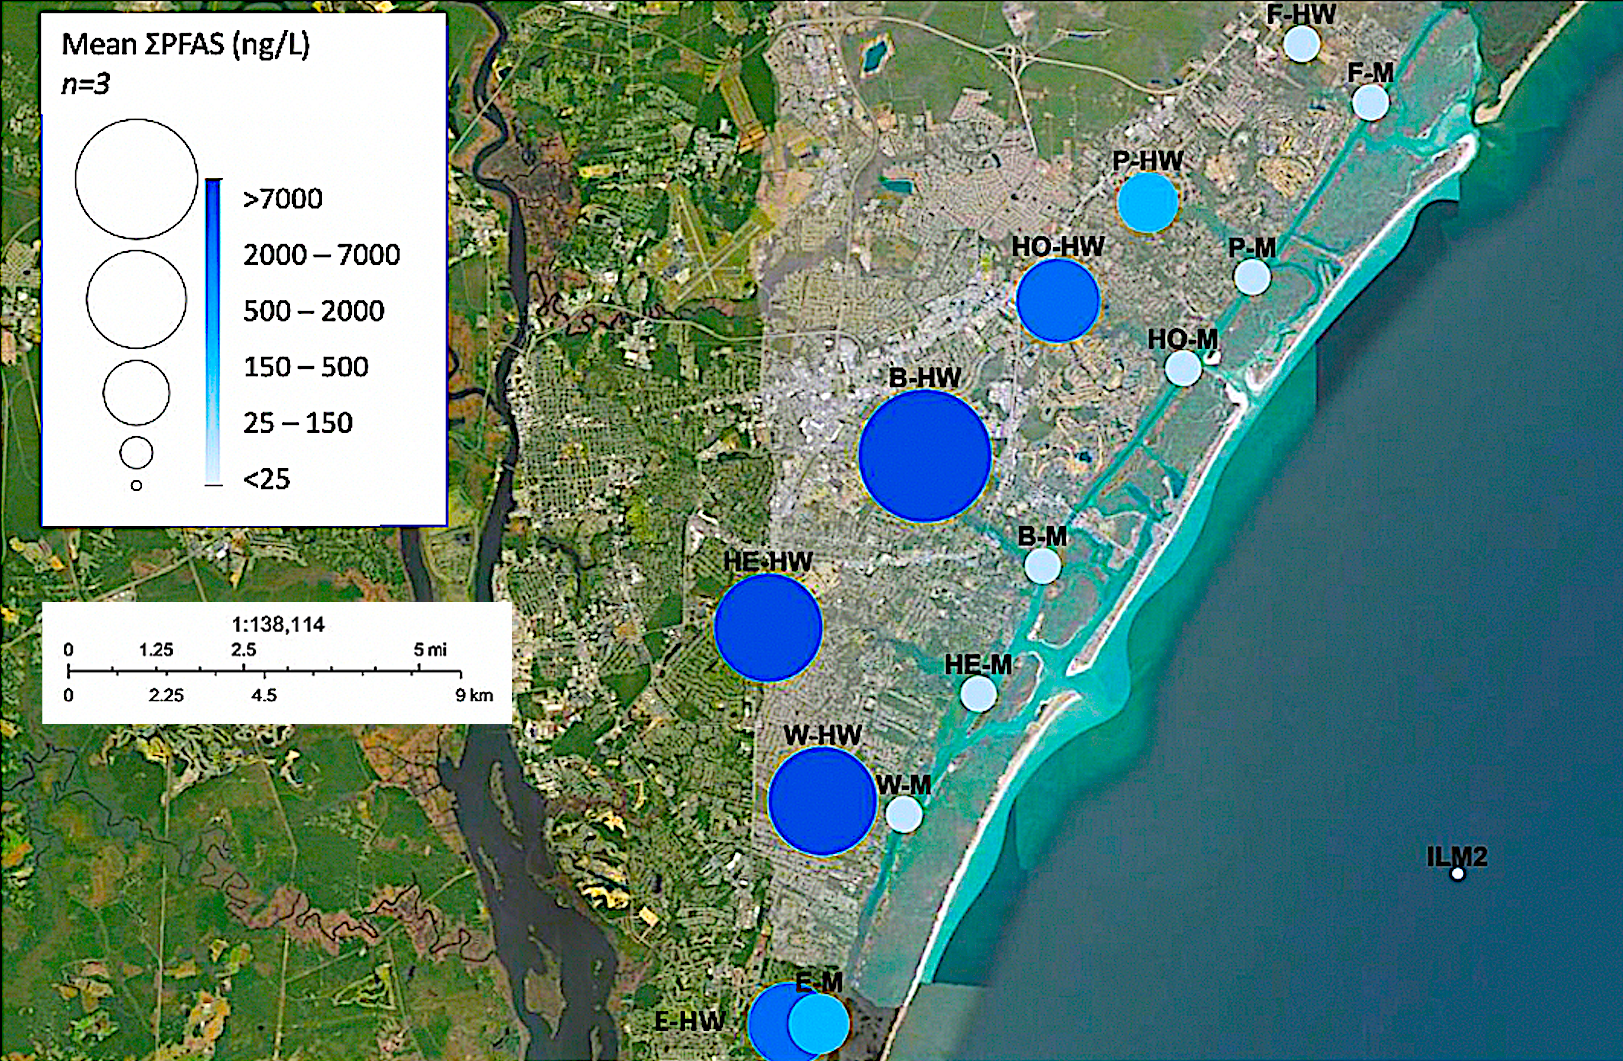 image: map showing tidal creek sampling locations, and one off-shore sampling location.